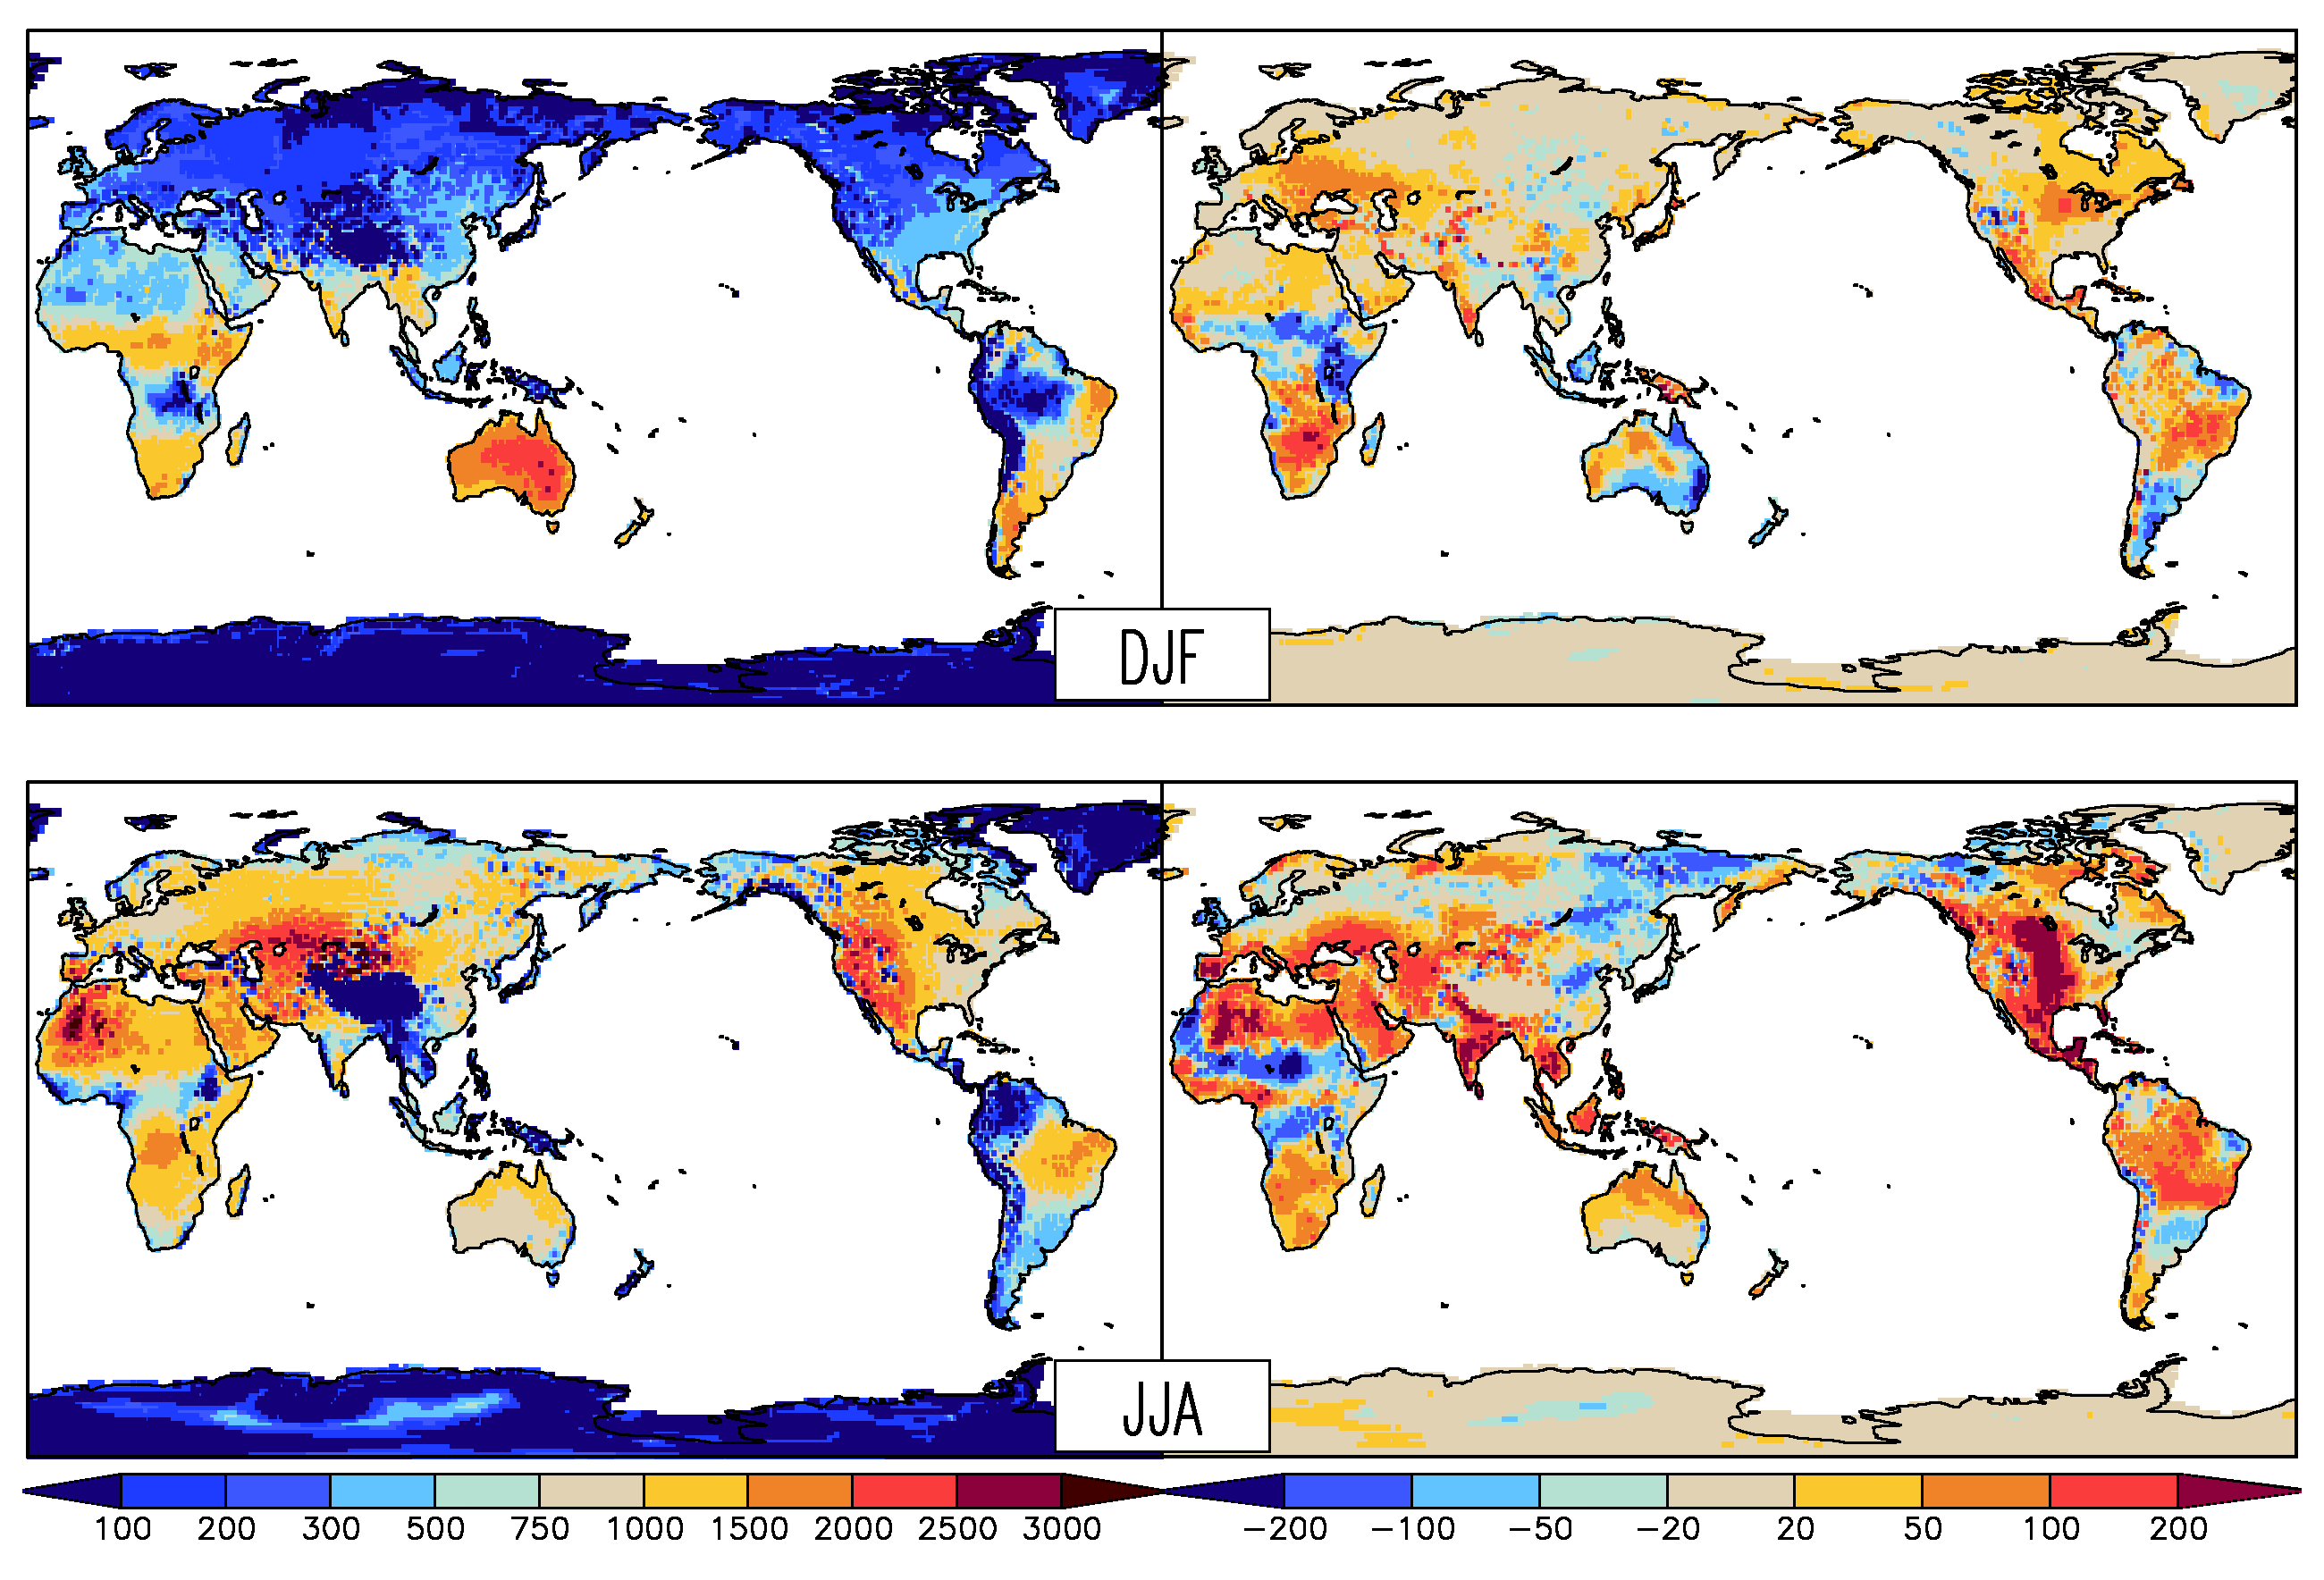 EVIDENCE FOR ENHANCED LANDATMOSPHERE FEEDBACK IN A WARMING CLIMATE